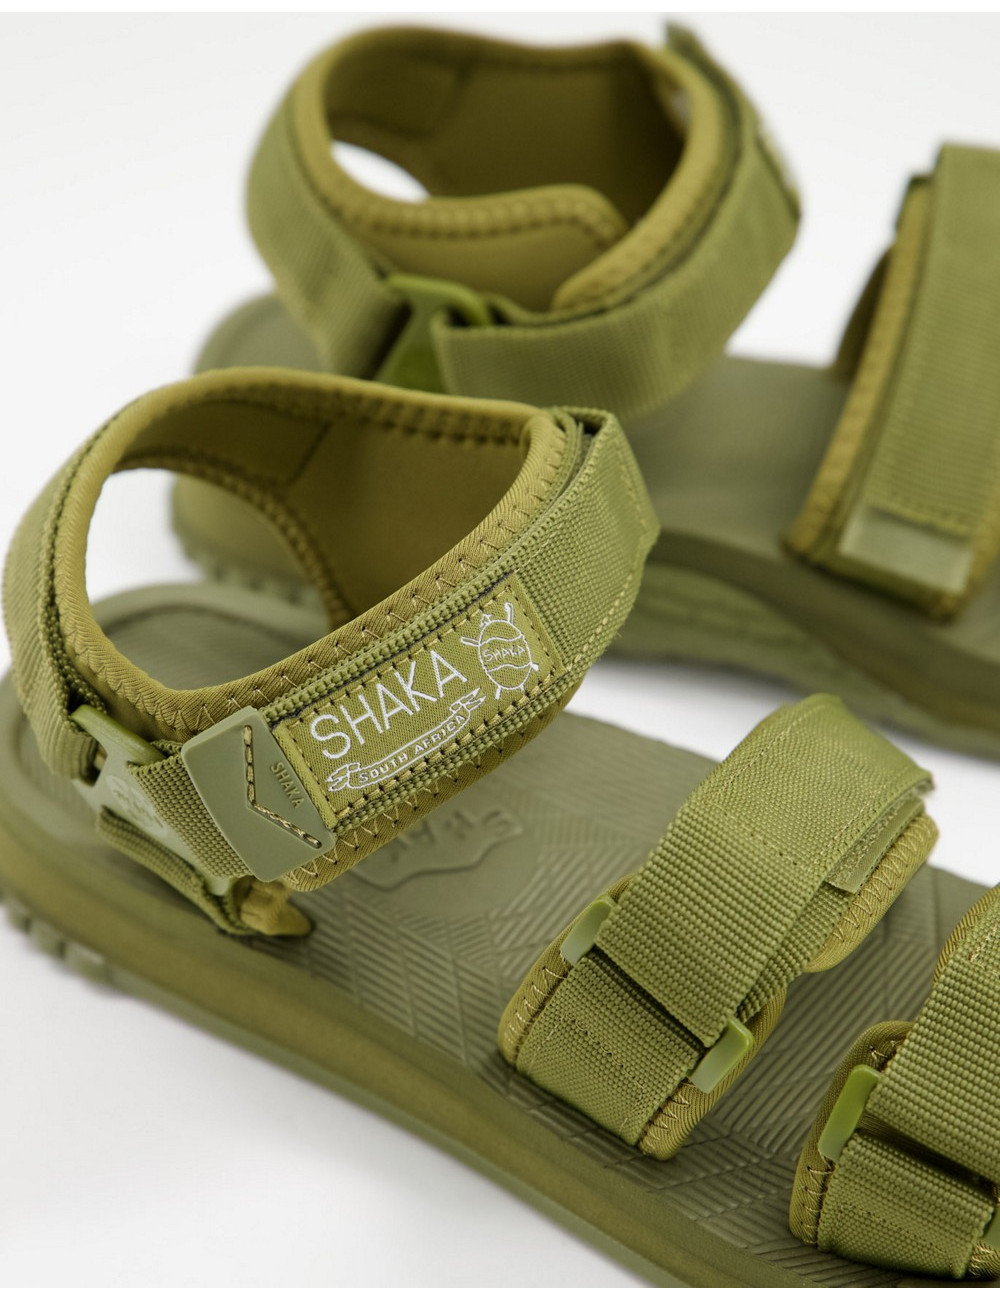 Shaka neo bungy sandals in...